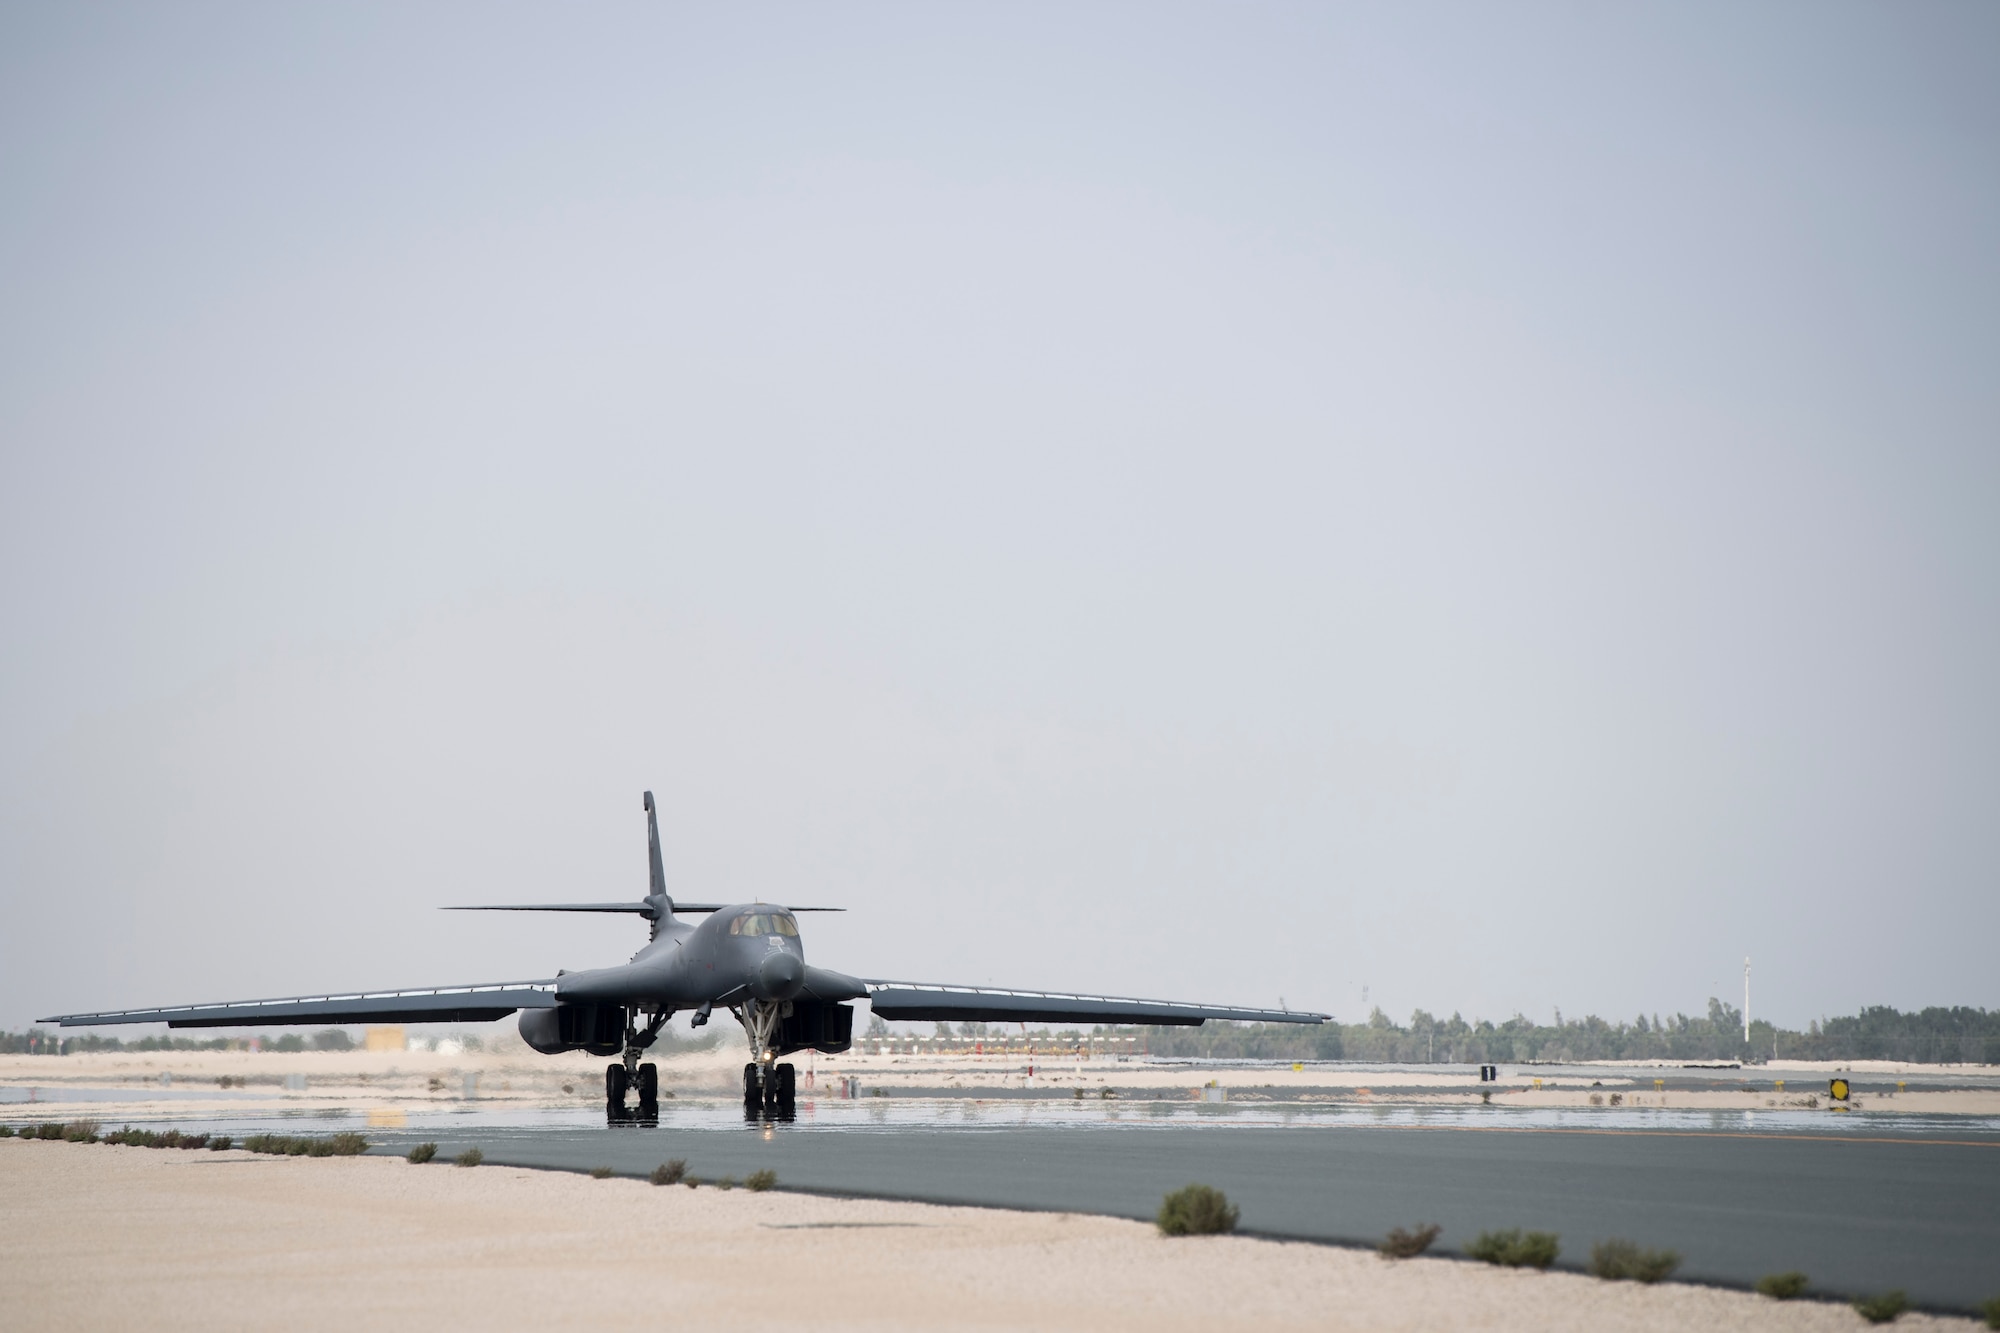 A U.S. Air Force B-1B Lancer, 9th Expeditionary Bomb Squadron, Air Force Central Command, takes off from Al Udeid Air Base, Qatar, during Joint Air Defense Exercise 19-01, Feb. 19, 2019. The aircraft participated with regional partners to test objective-based command and control actions during the exercise. (U.S. Air Force photo by Senior Airman Gracie I. Lee)